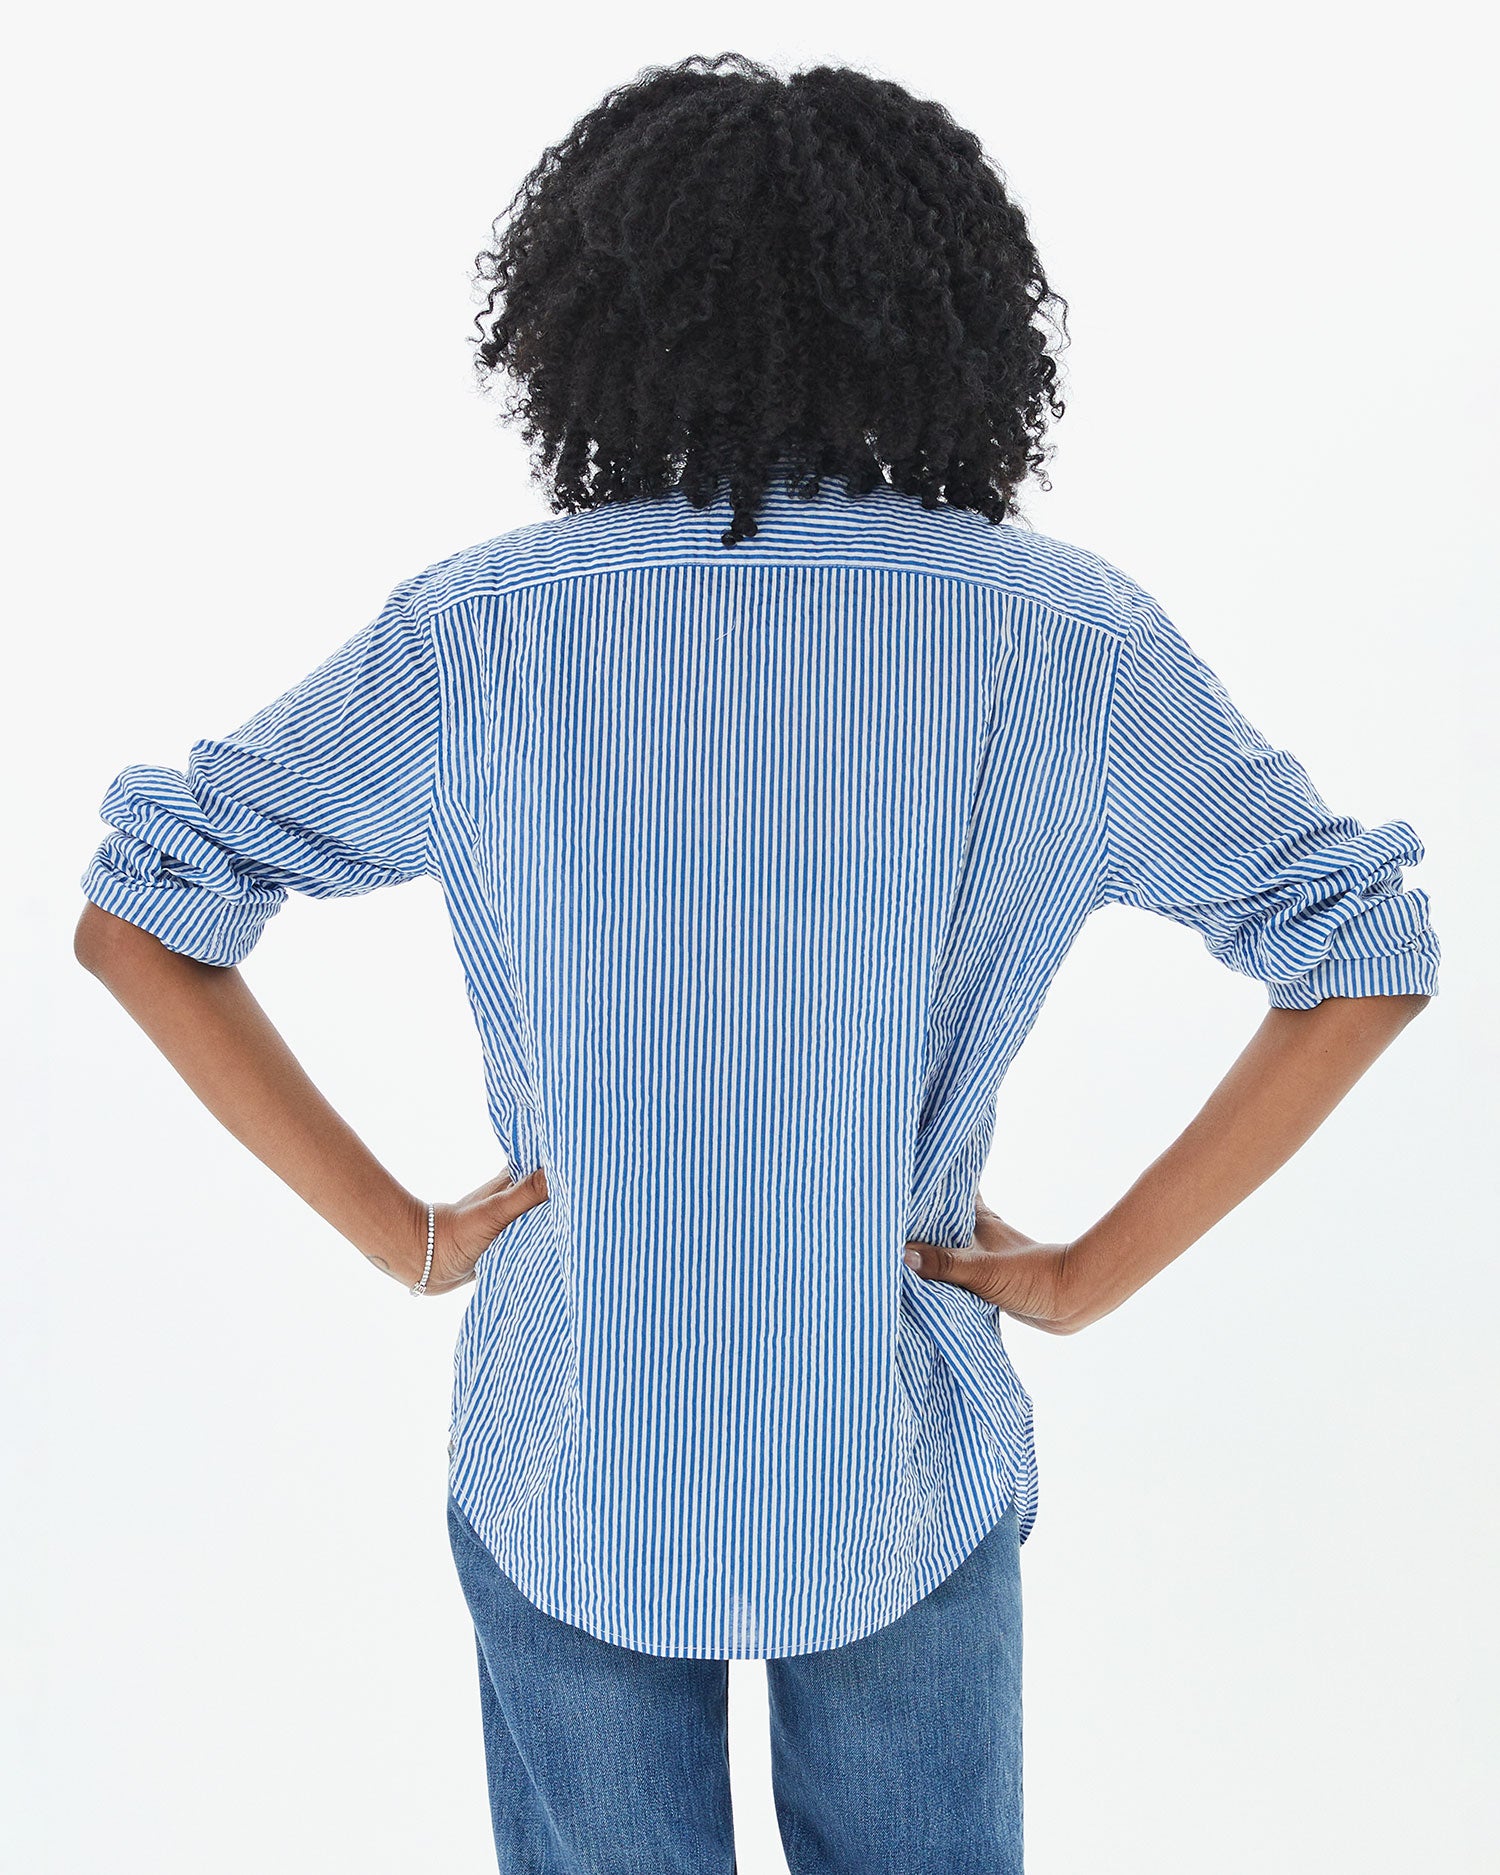 back view of Mecca in the Steven Alan Tux Shirt In Blue and Cream Stripe with her hands on her hips